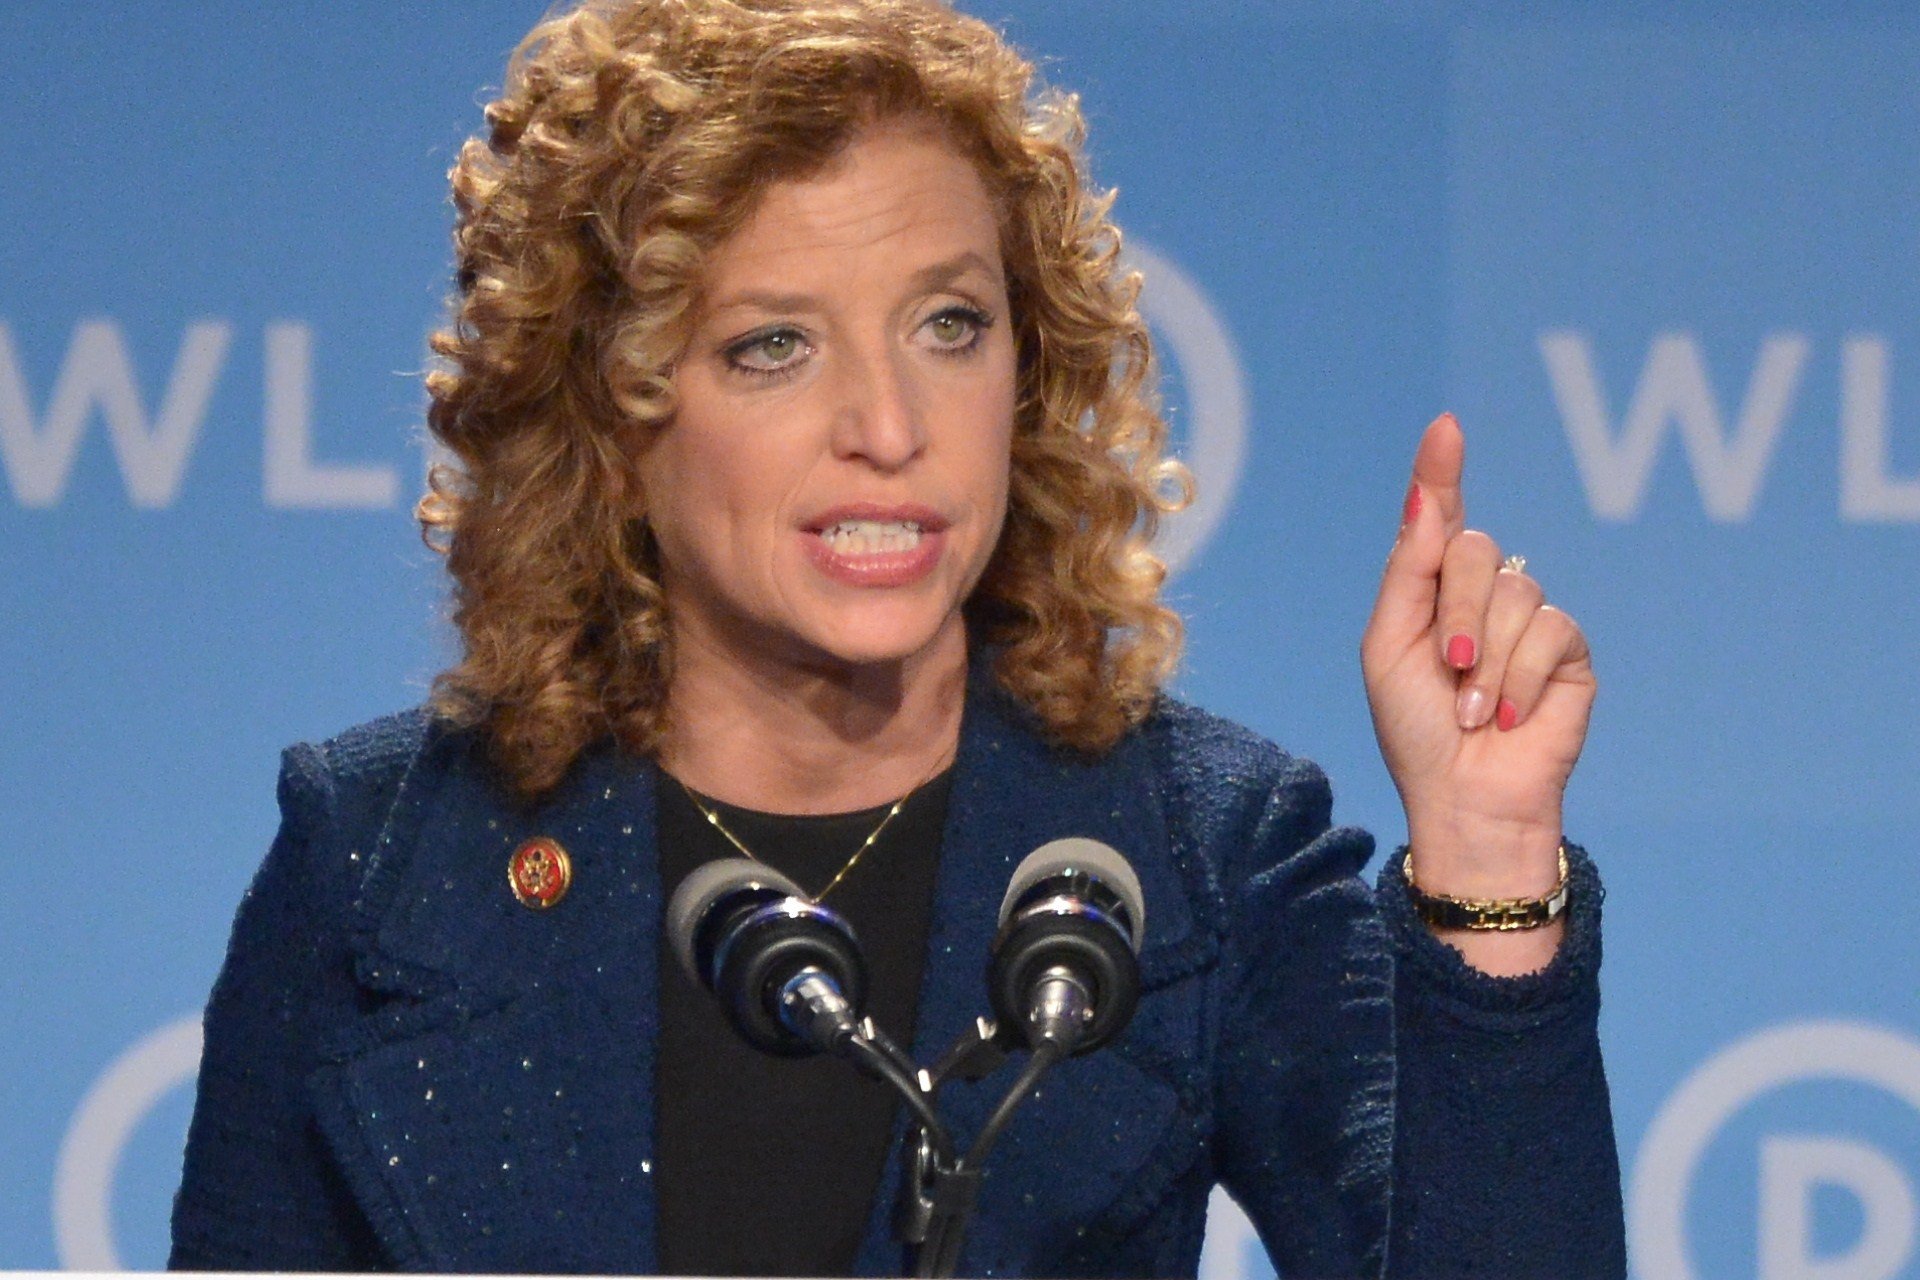 Democratic National Committee (DNC) Chair, Representative Debbie Wasserman Schultz, Democrat of Florida, speaks at the DNC's Leadership Forum Issues Conference in Washington on Sept. 19, 2014. (Mandel Ngan—AFP/Getty Images)